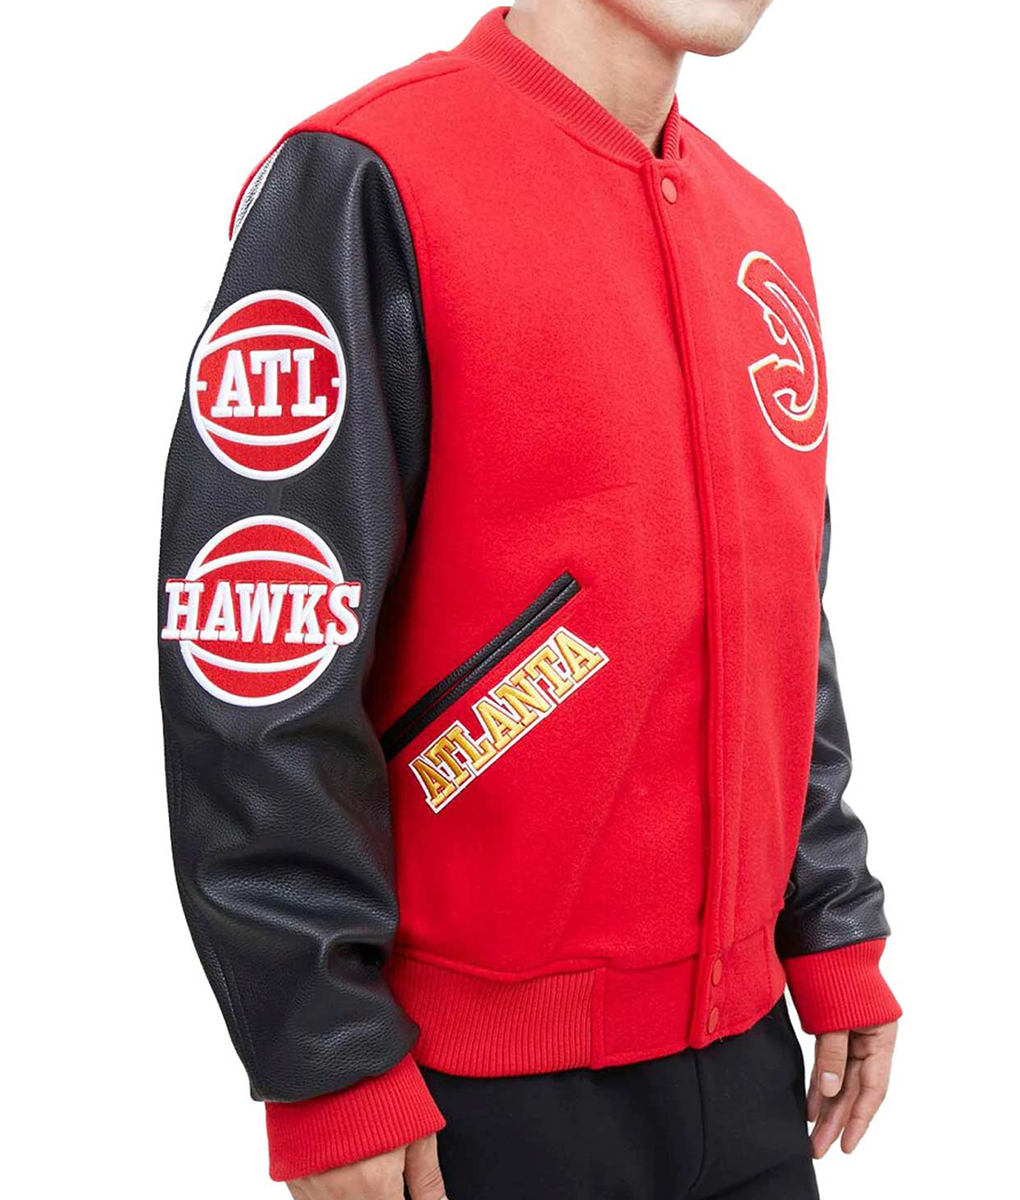 ATL Hawks Red and Black Jacket (2)